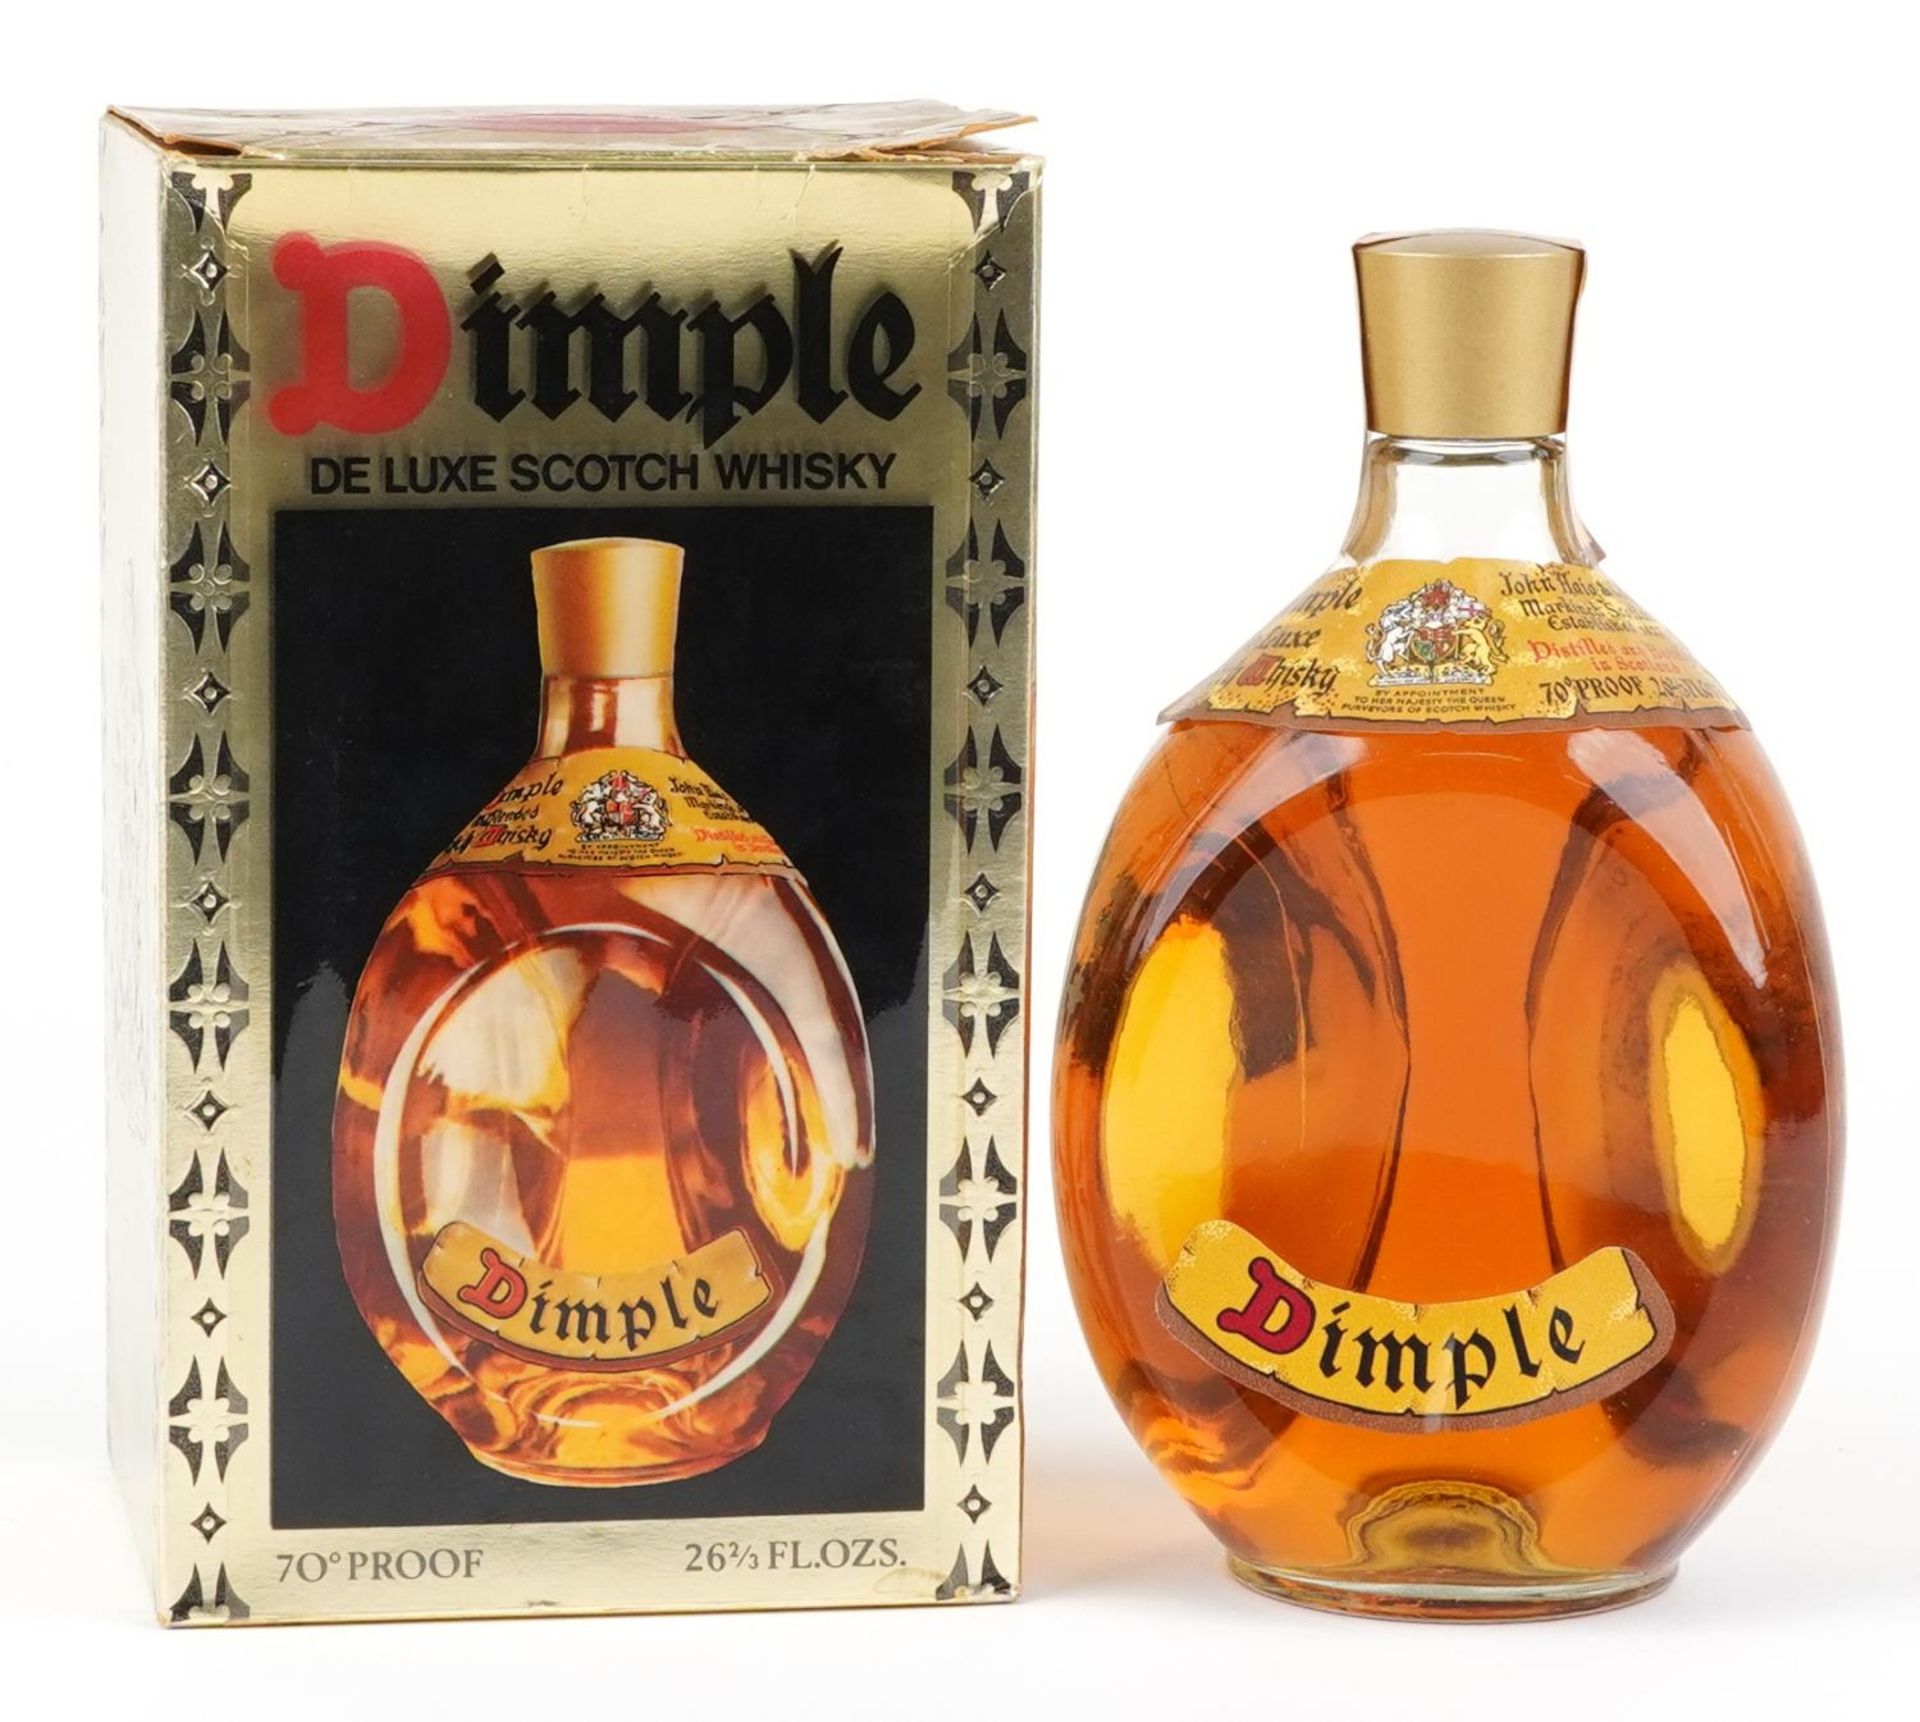 Bottle of Dimple Deluxe Scotch Whisky with box